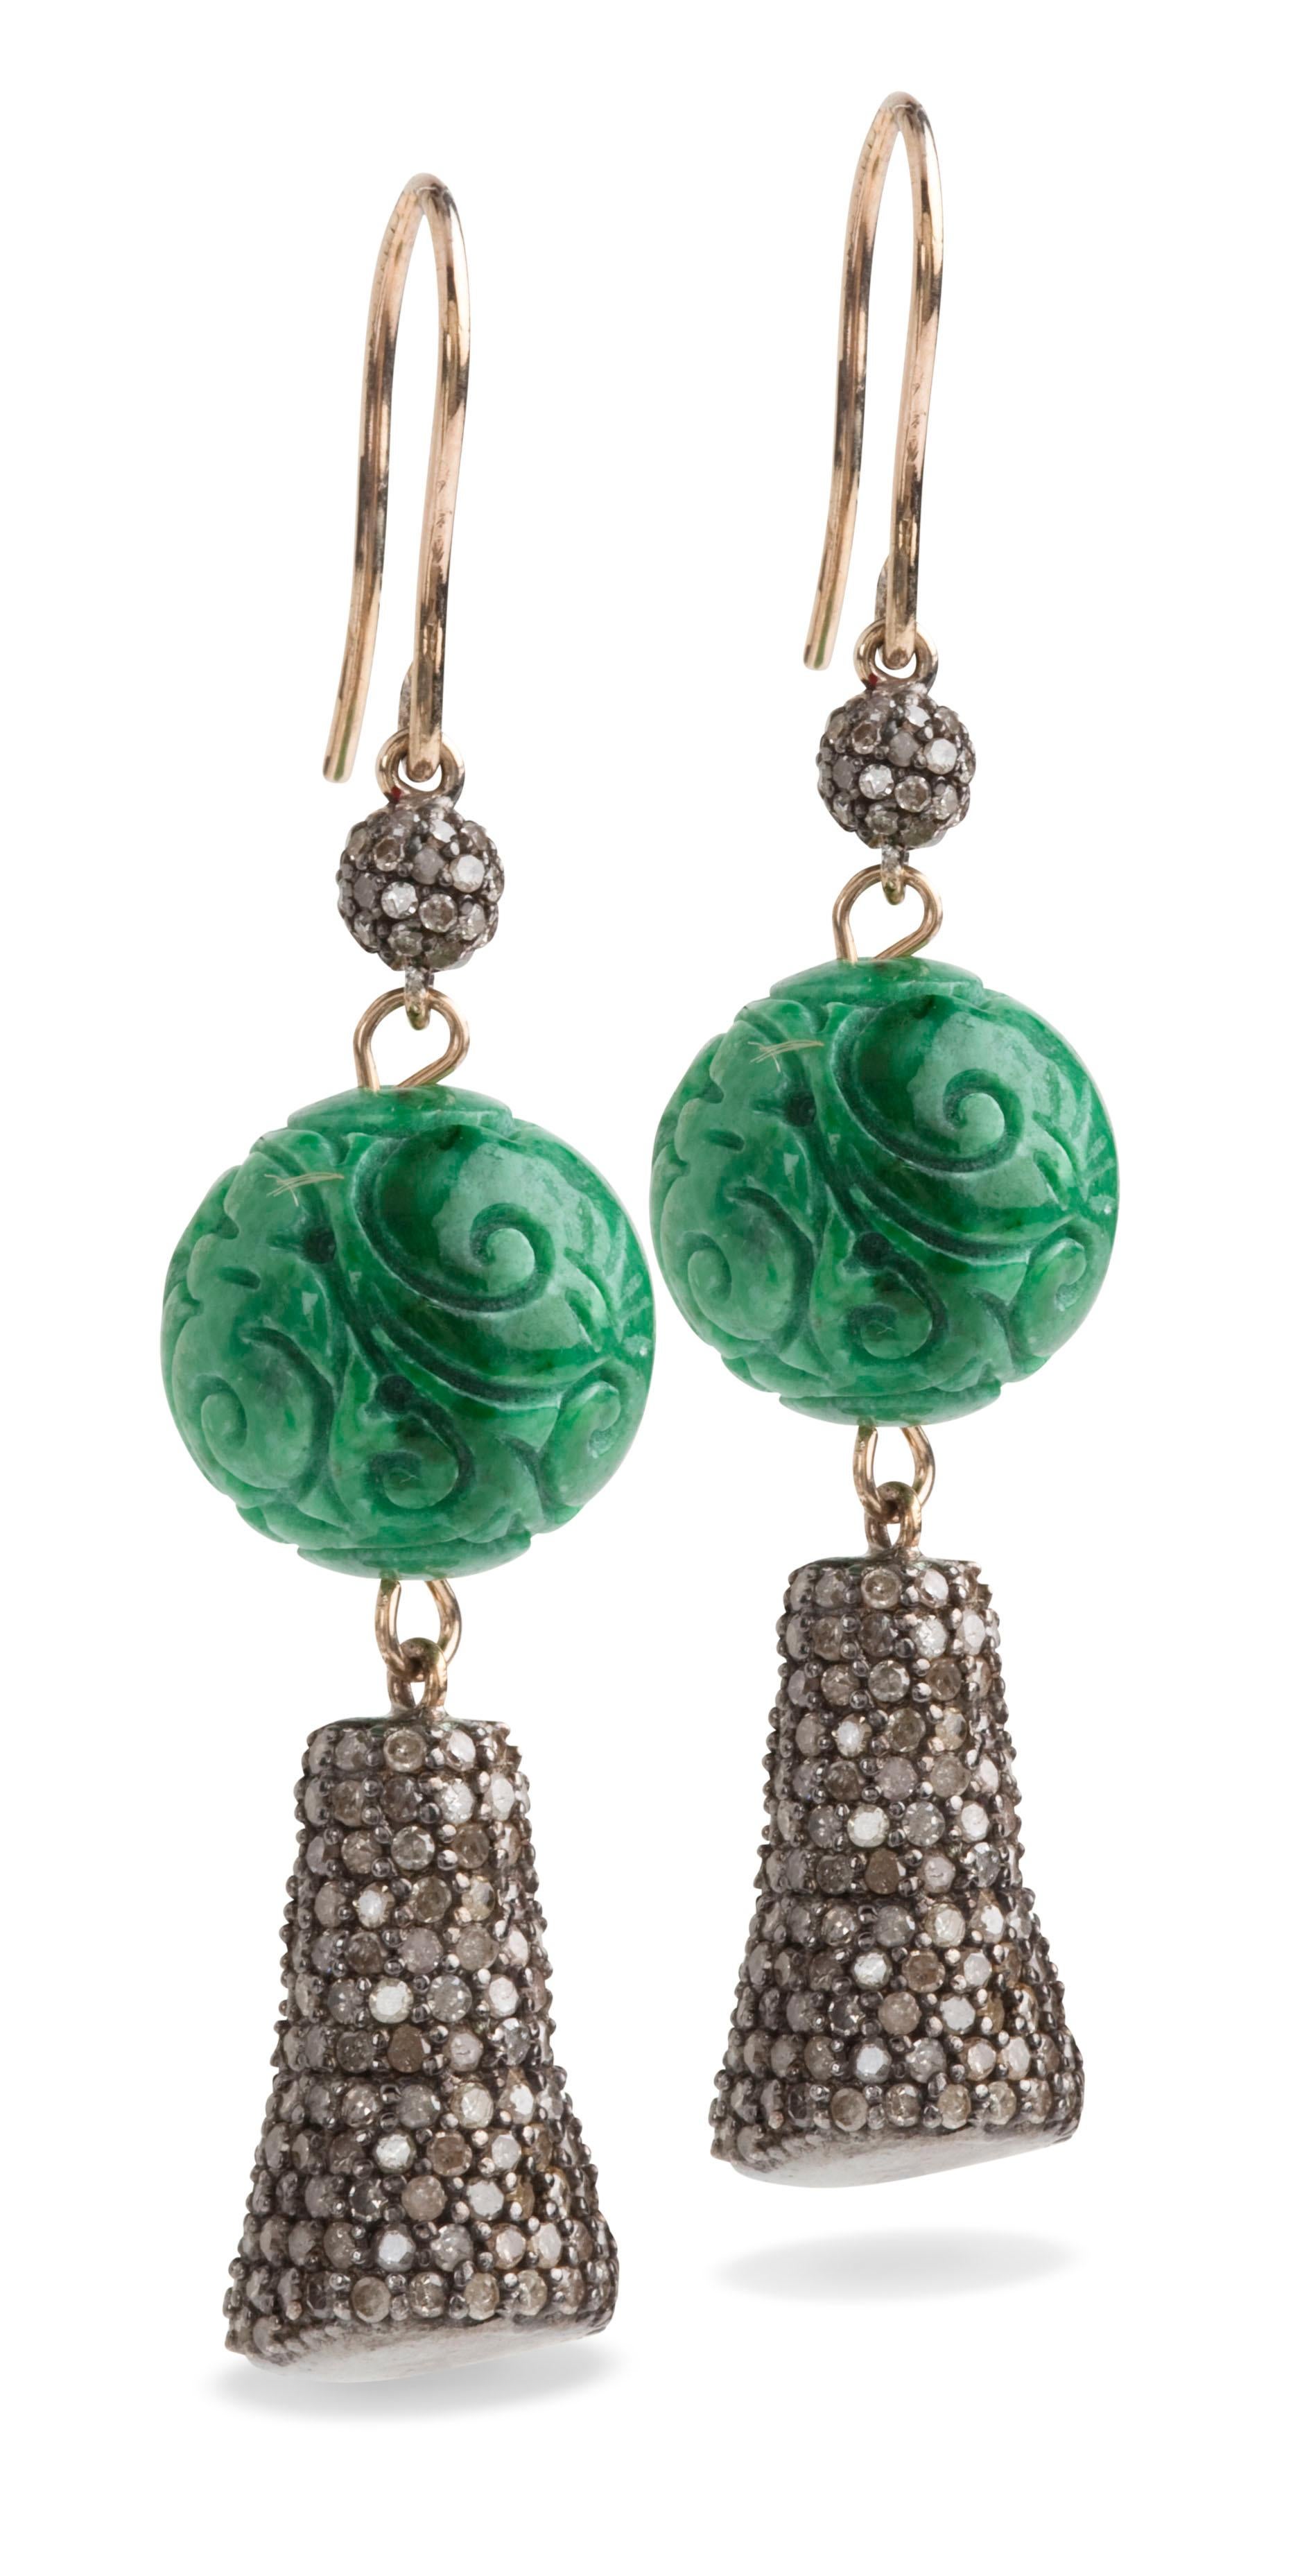 Bochic Vintage Green jade and diamond earrings 
Beautiful Jade carved antique balls 13MM
18K Black Gold 
White and Gray diamonds 
French hooks 
The earrings are light and are around 2 inch length 
Signed Bochic 
750 Gold 
Comes with a Bochic pouch 